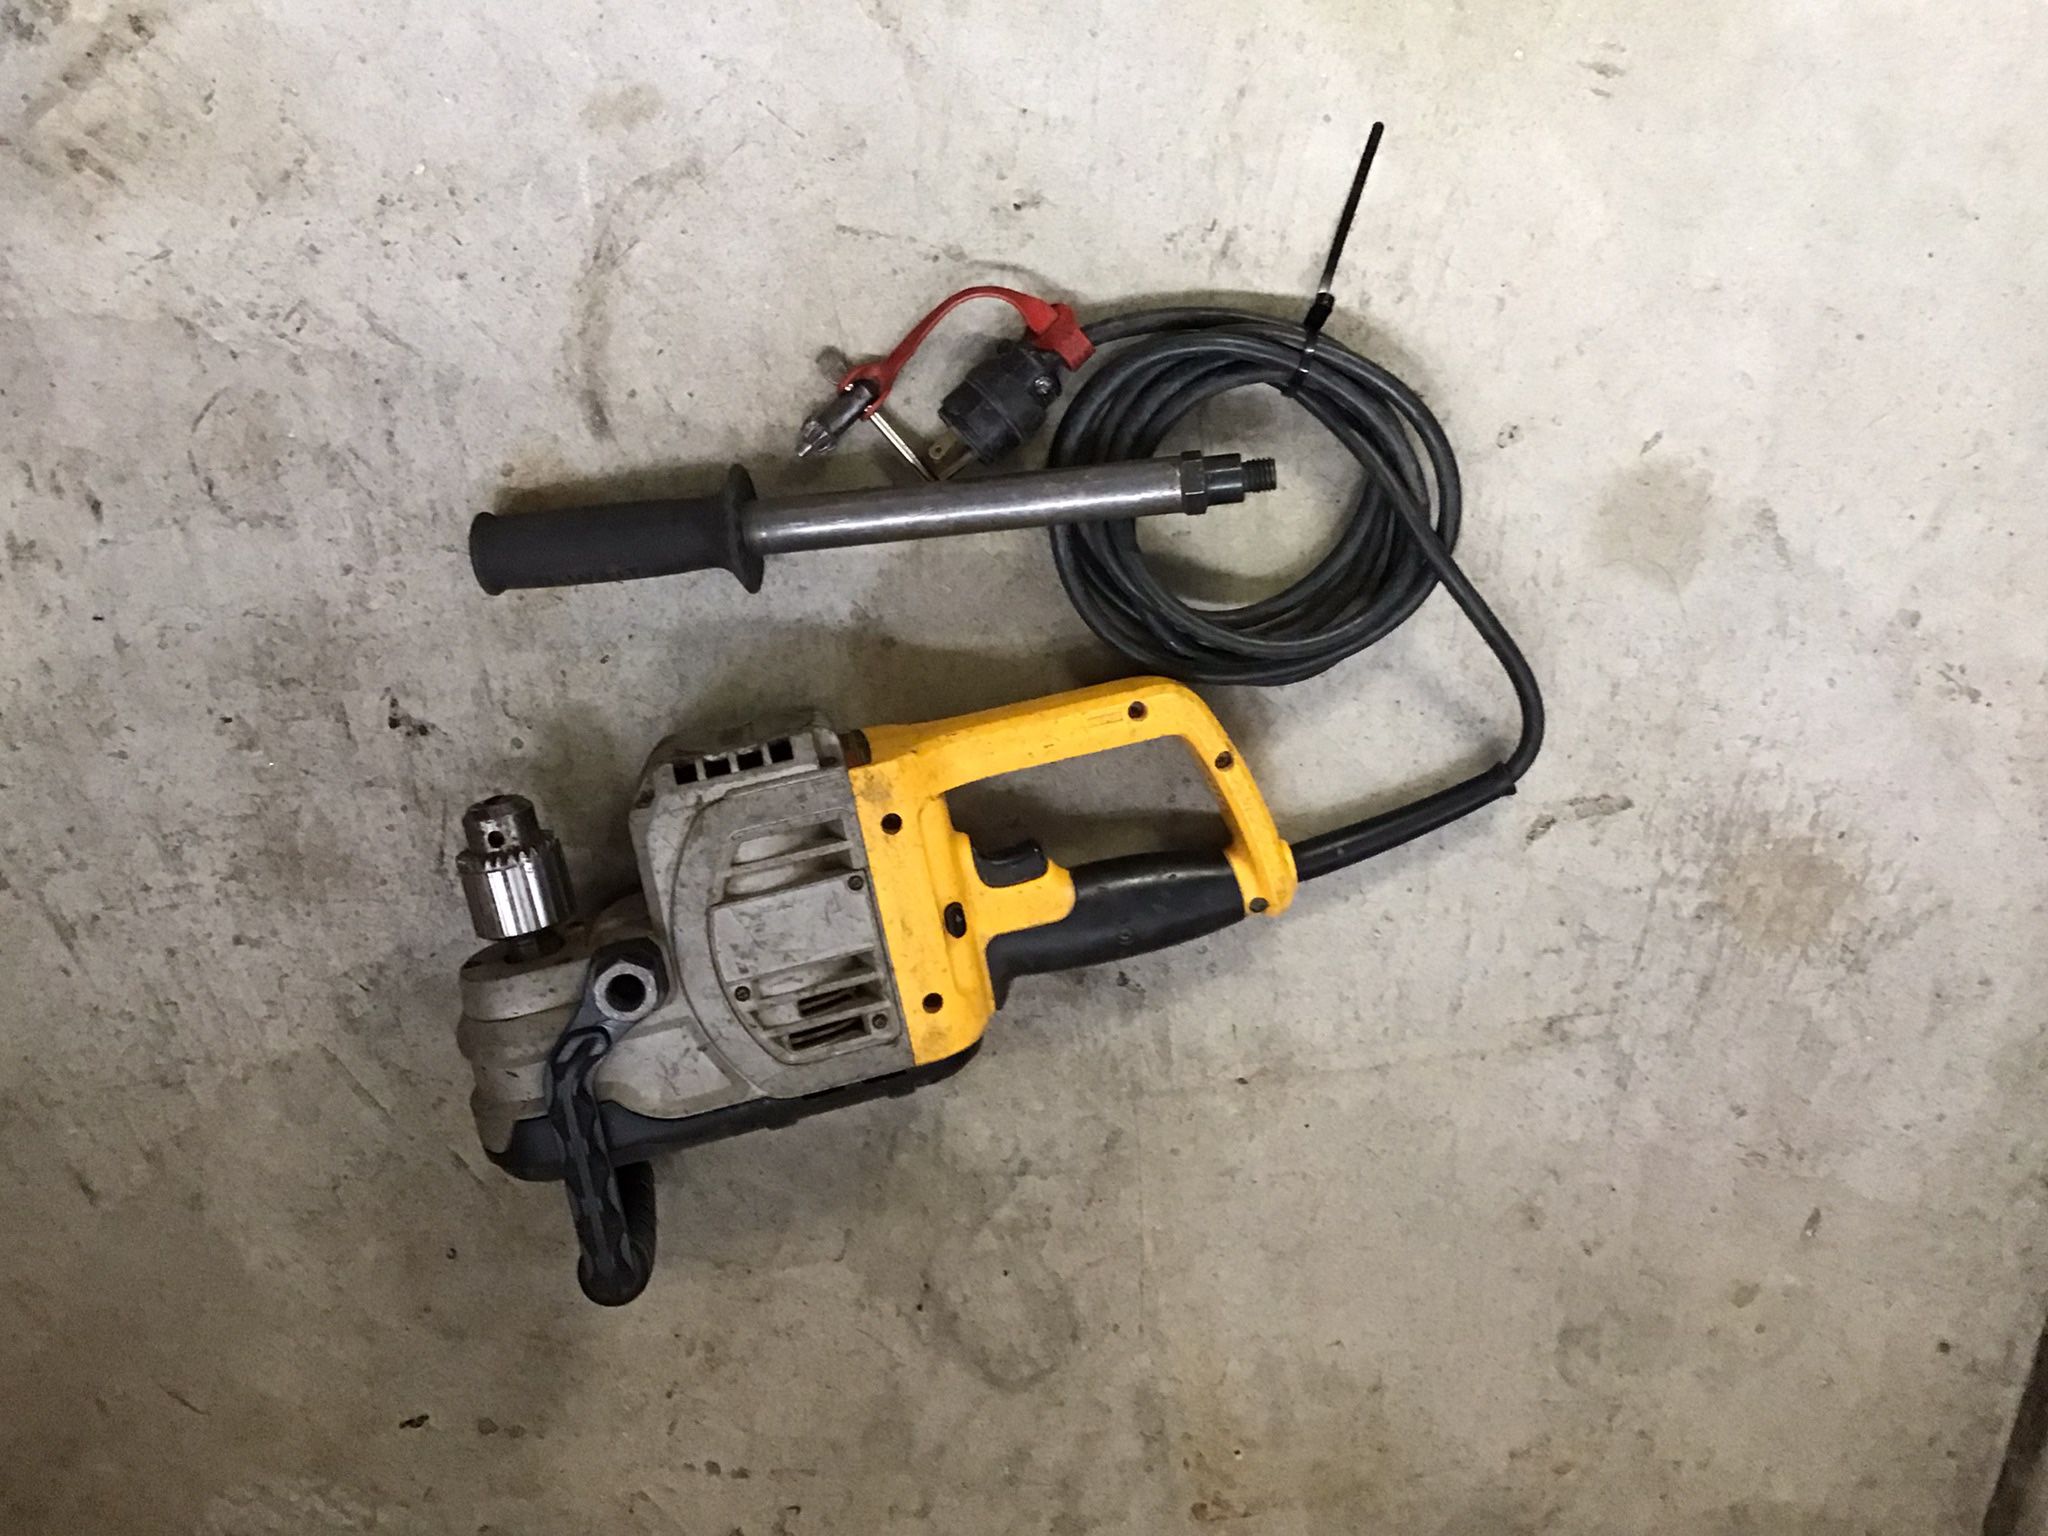 Dewalt 1/2 “ Electric Angle Drill With Clutch Good Condition Price Is Firm